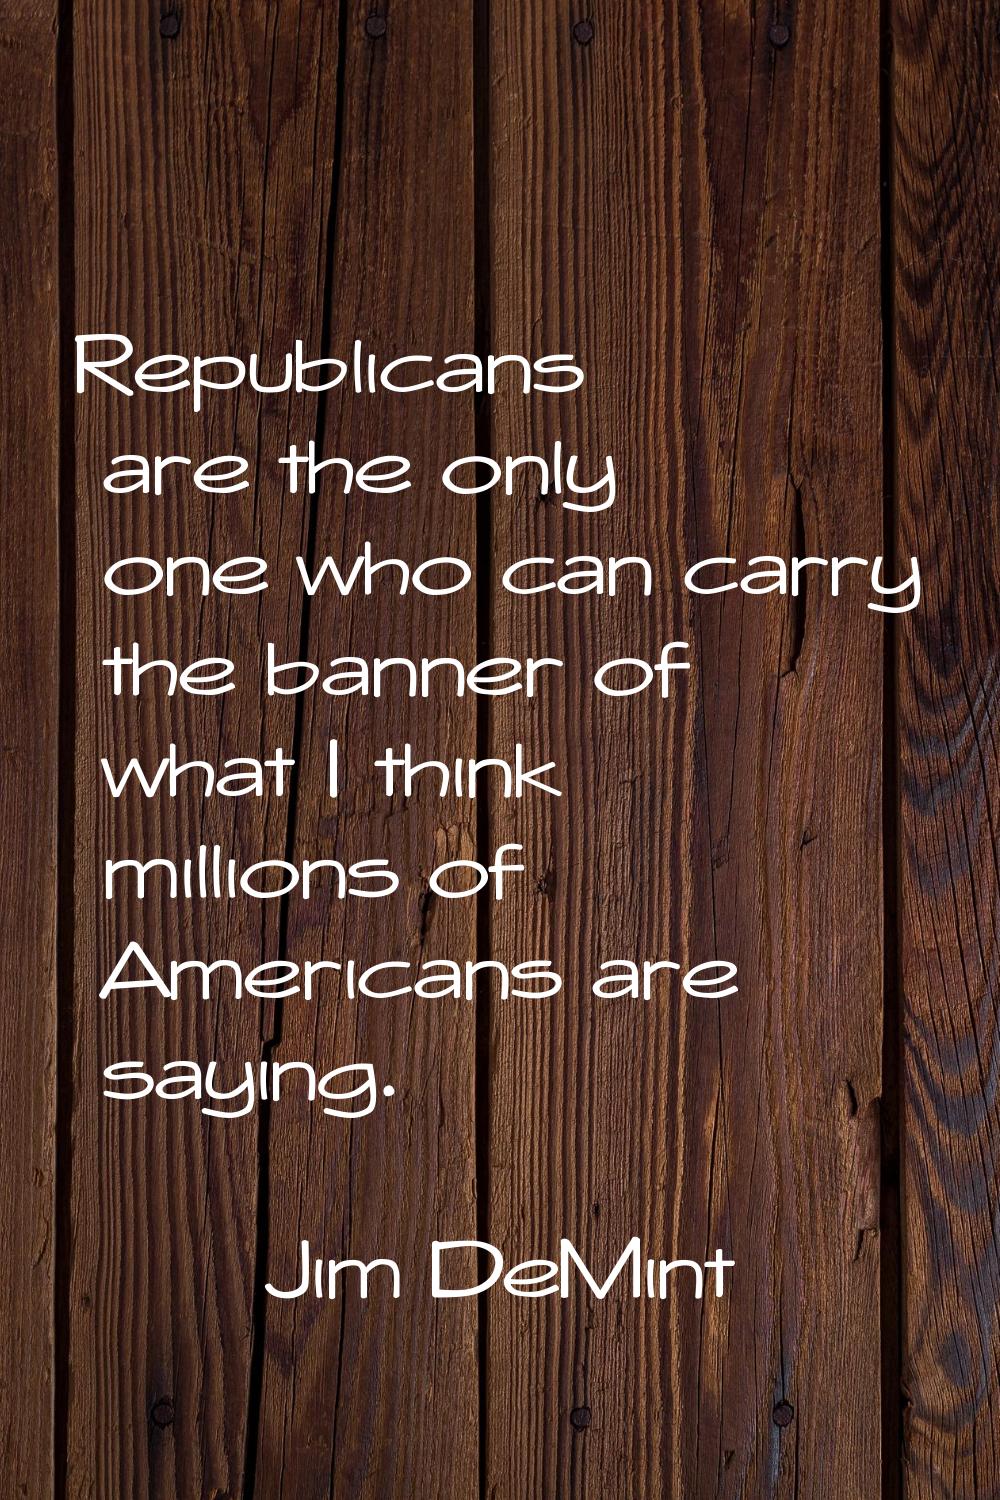 Republicans are the only one who can carry the banner of what I think millions of Americans are say